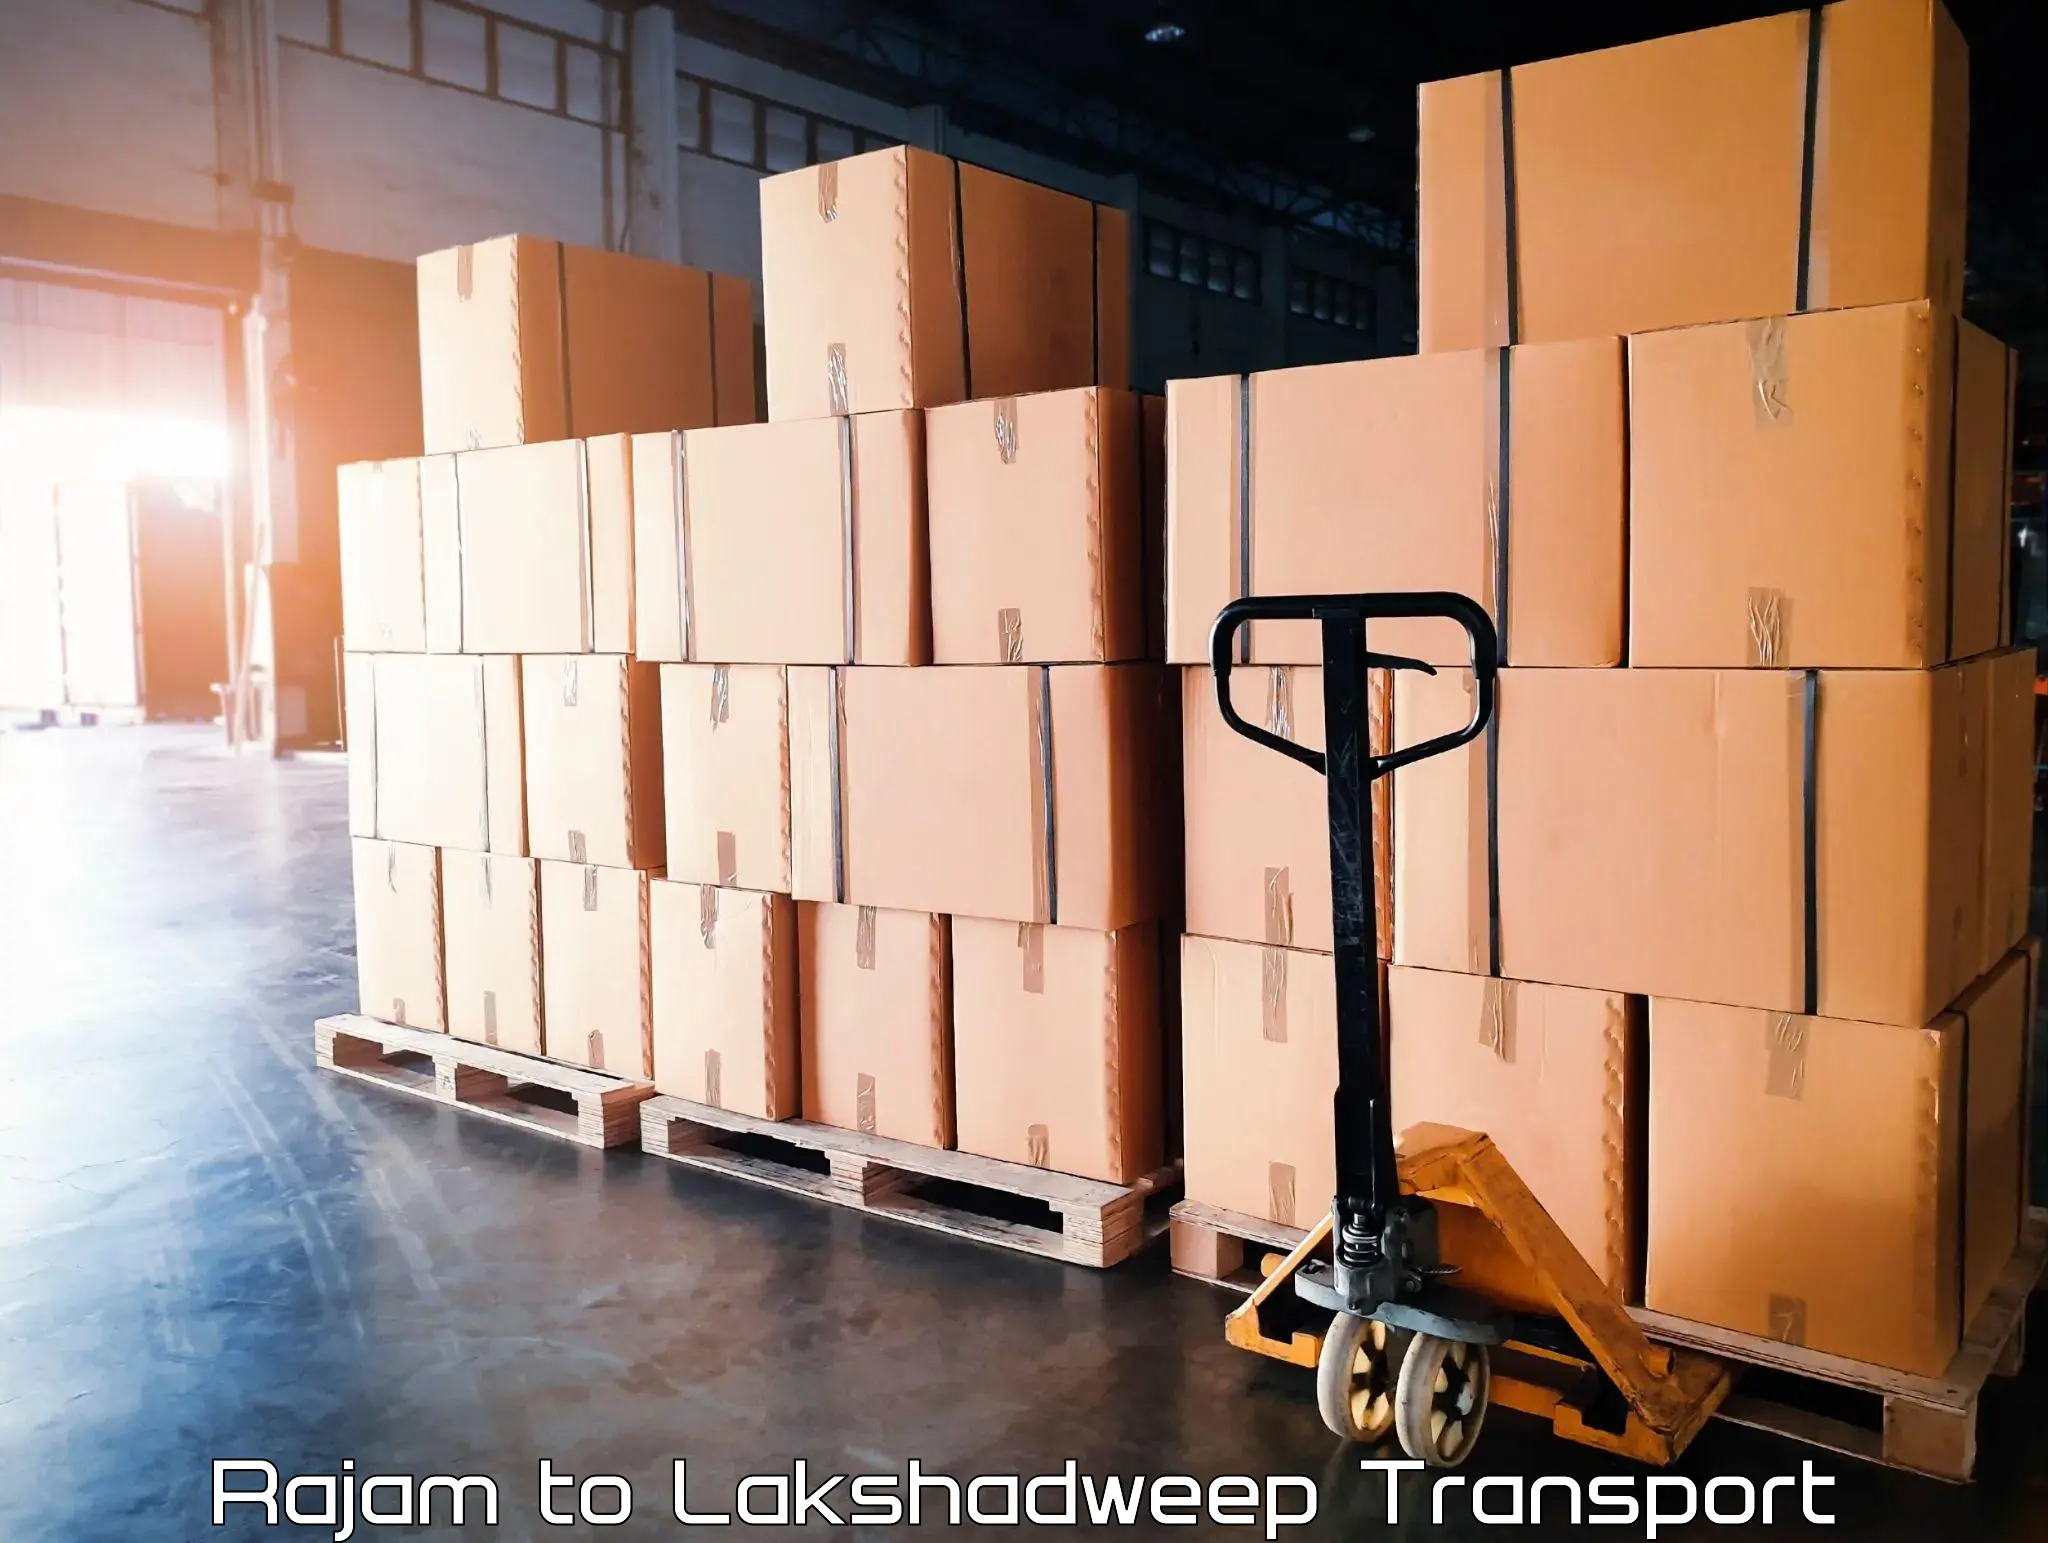 Transport bike from one state to another in Rajam to Lakshadweep